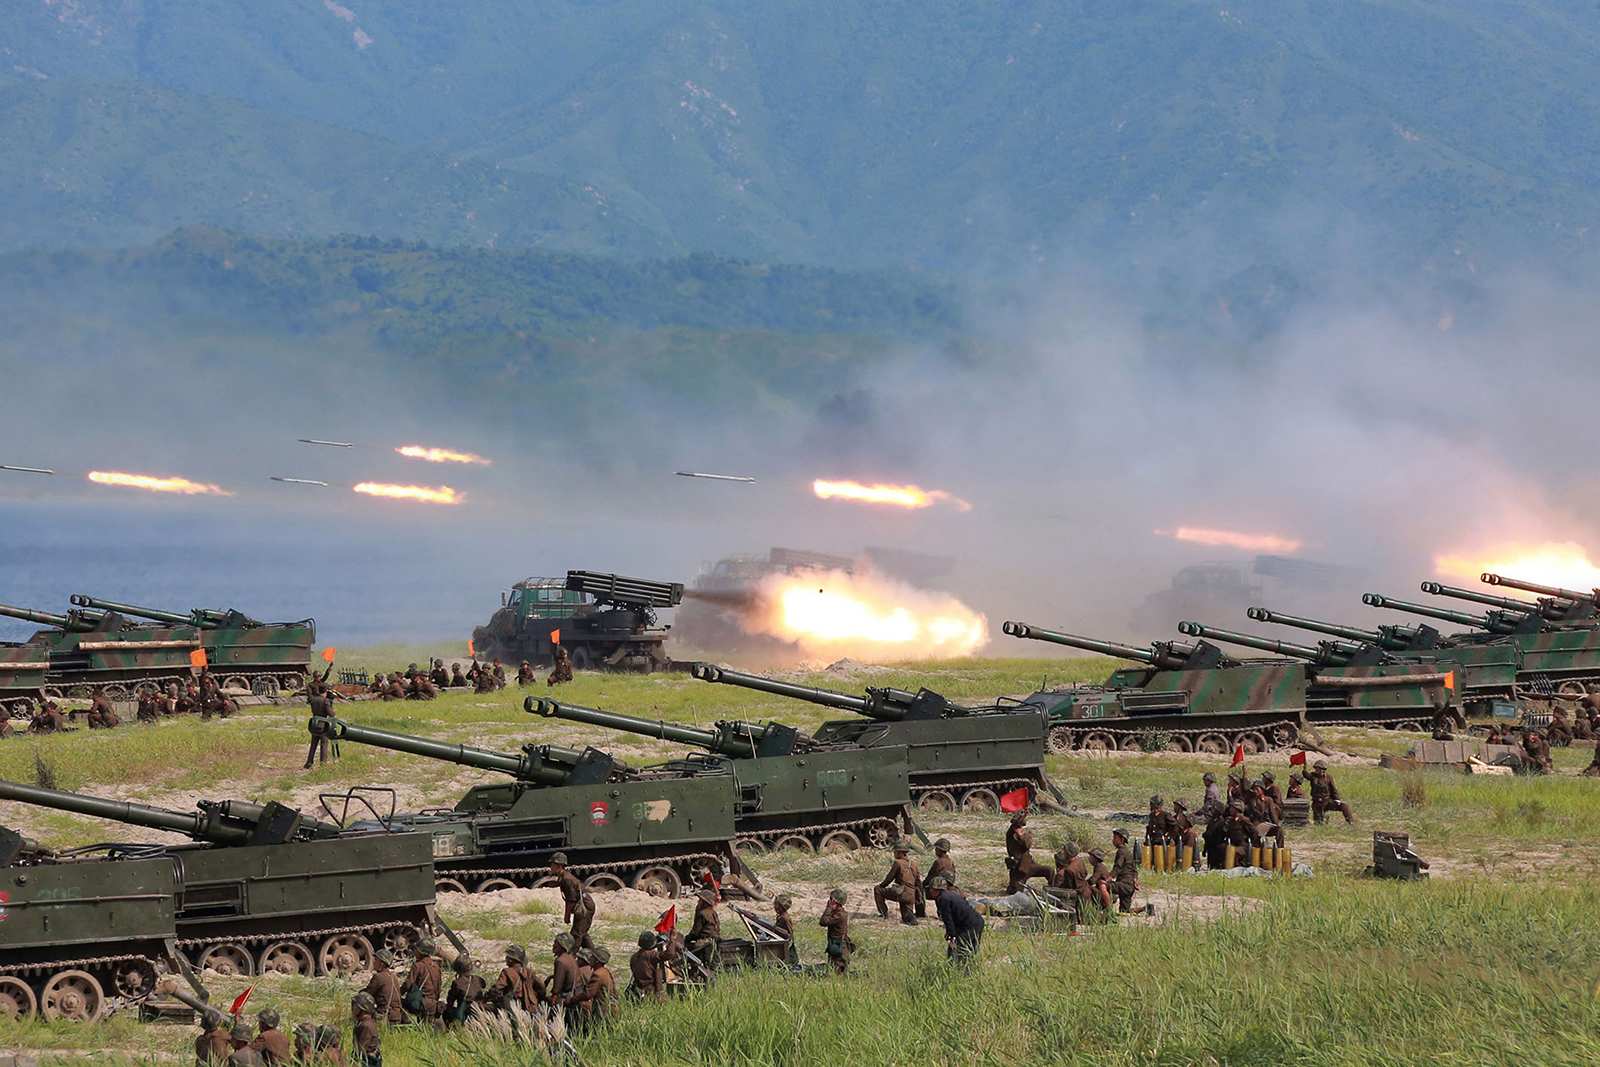 Kim Jong Un tests new rockets to strike Seoul and perhaps sell to Putin